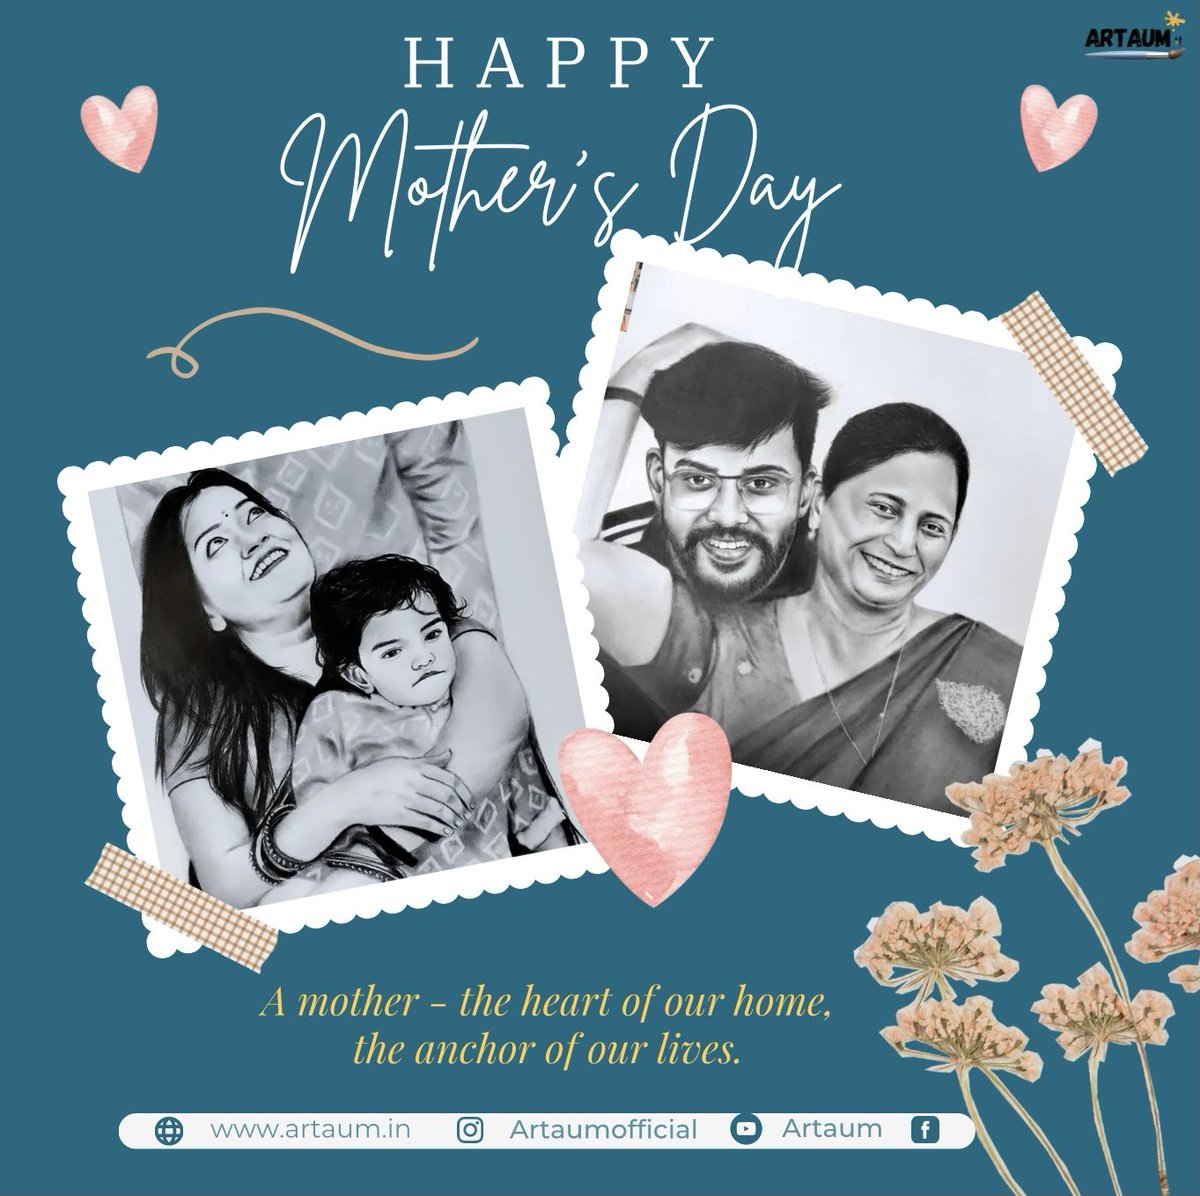 Happy Mother’s Day. A mother - the heart of our home, the anchor of our lives. . . #happymothersday #mothersday #ma #mom #motherlove #giftformother